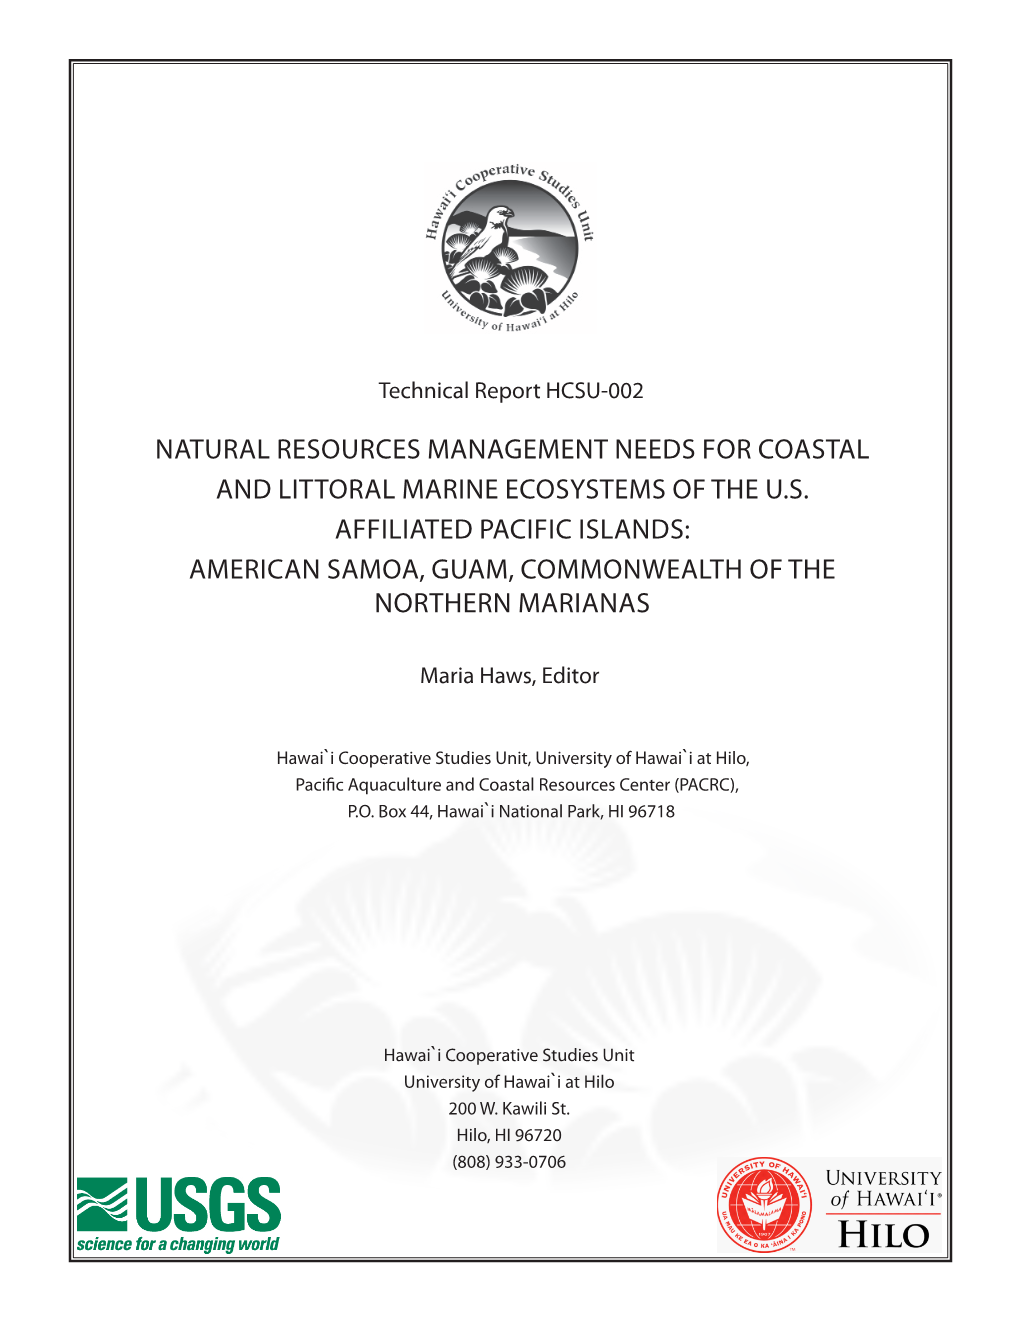 Natural Resources Management Needs for Coastal and Littoral Marine Ecosystems of the U.S